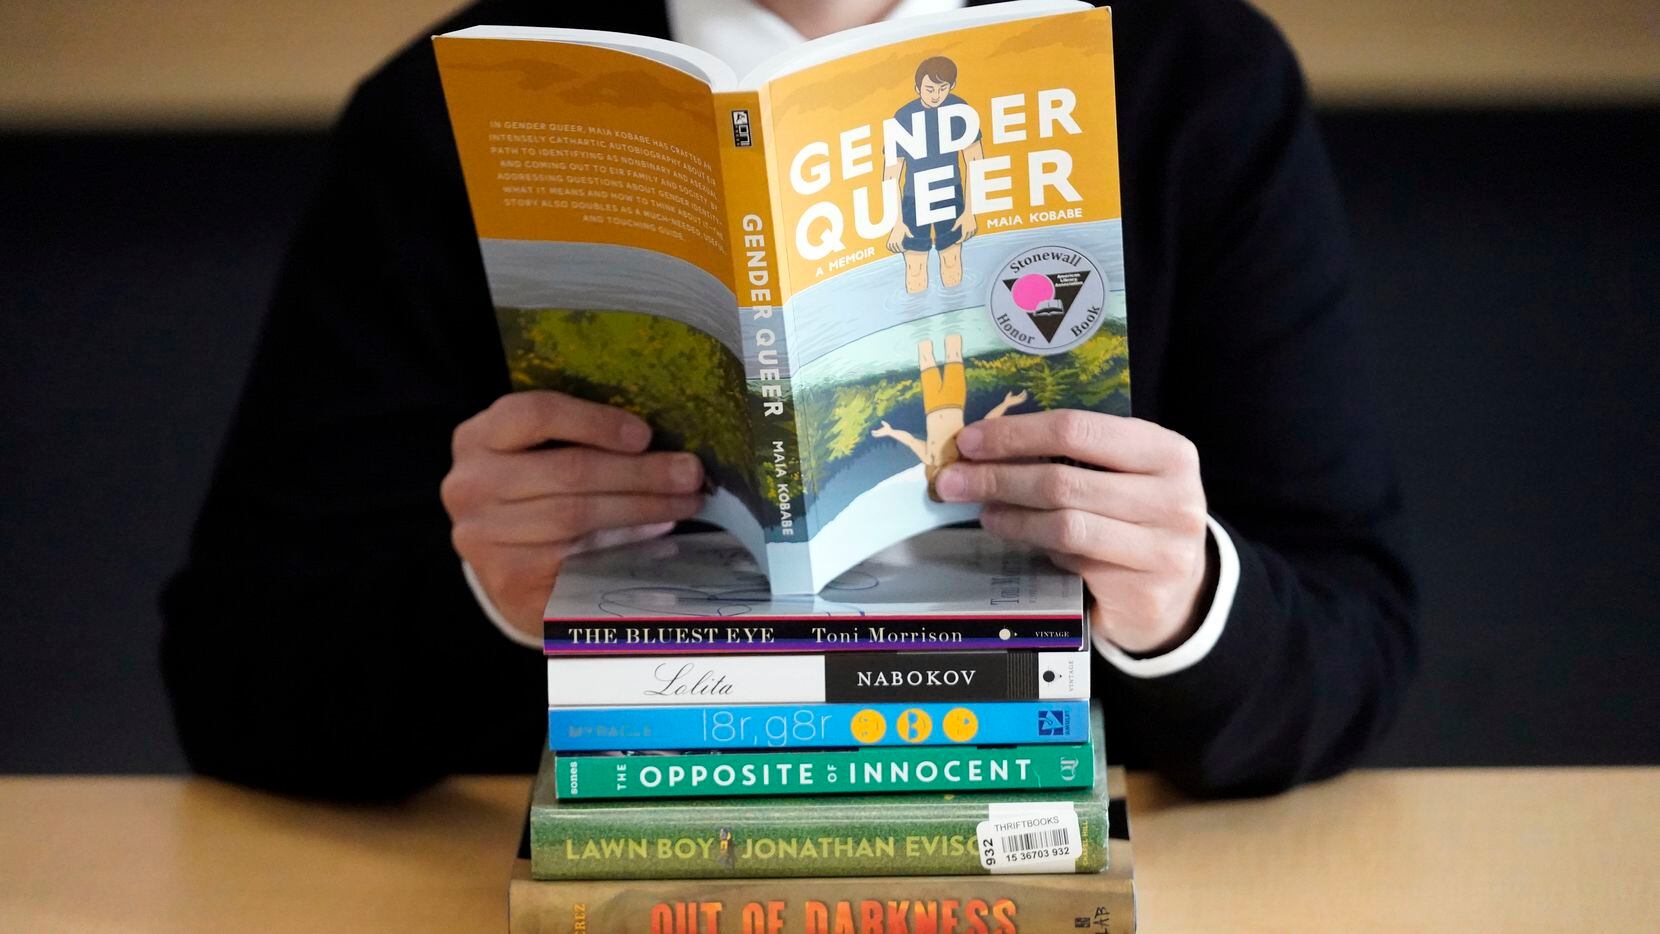 Books about LGBTQ characters have triggered complaints from conservatives.